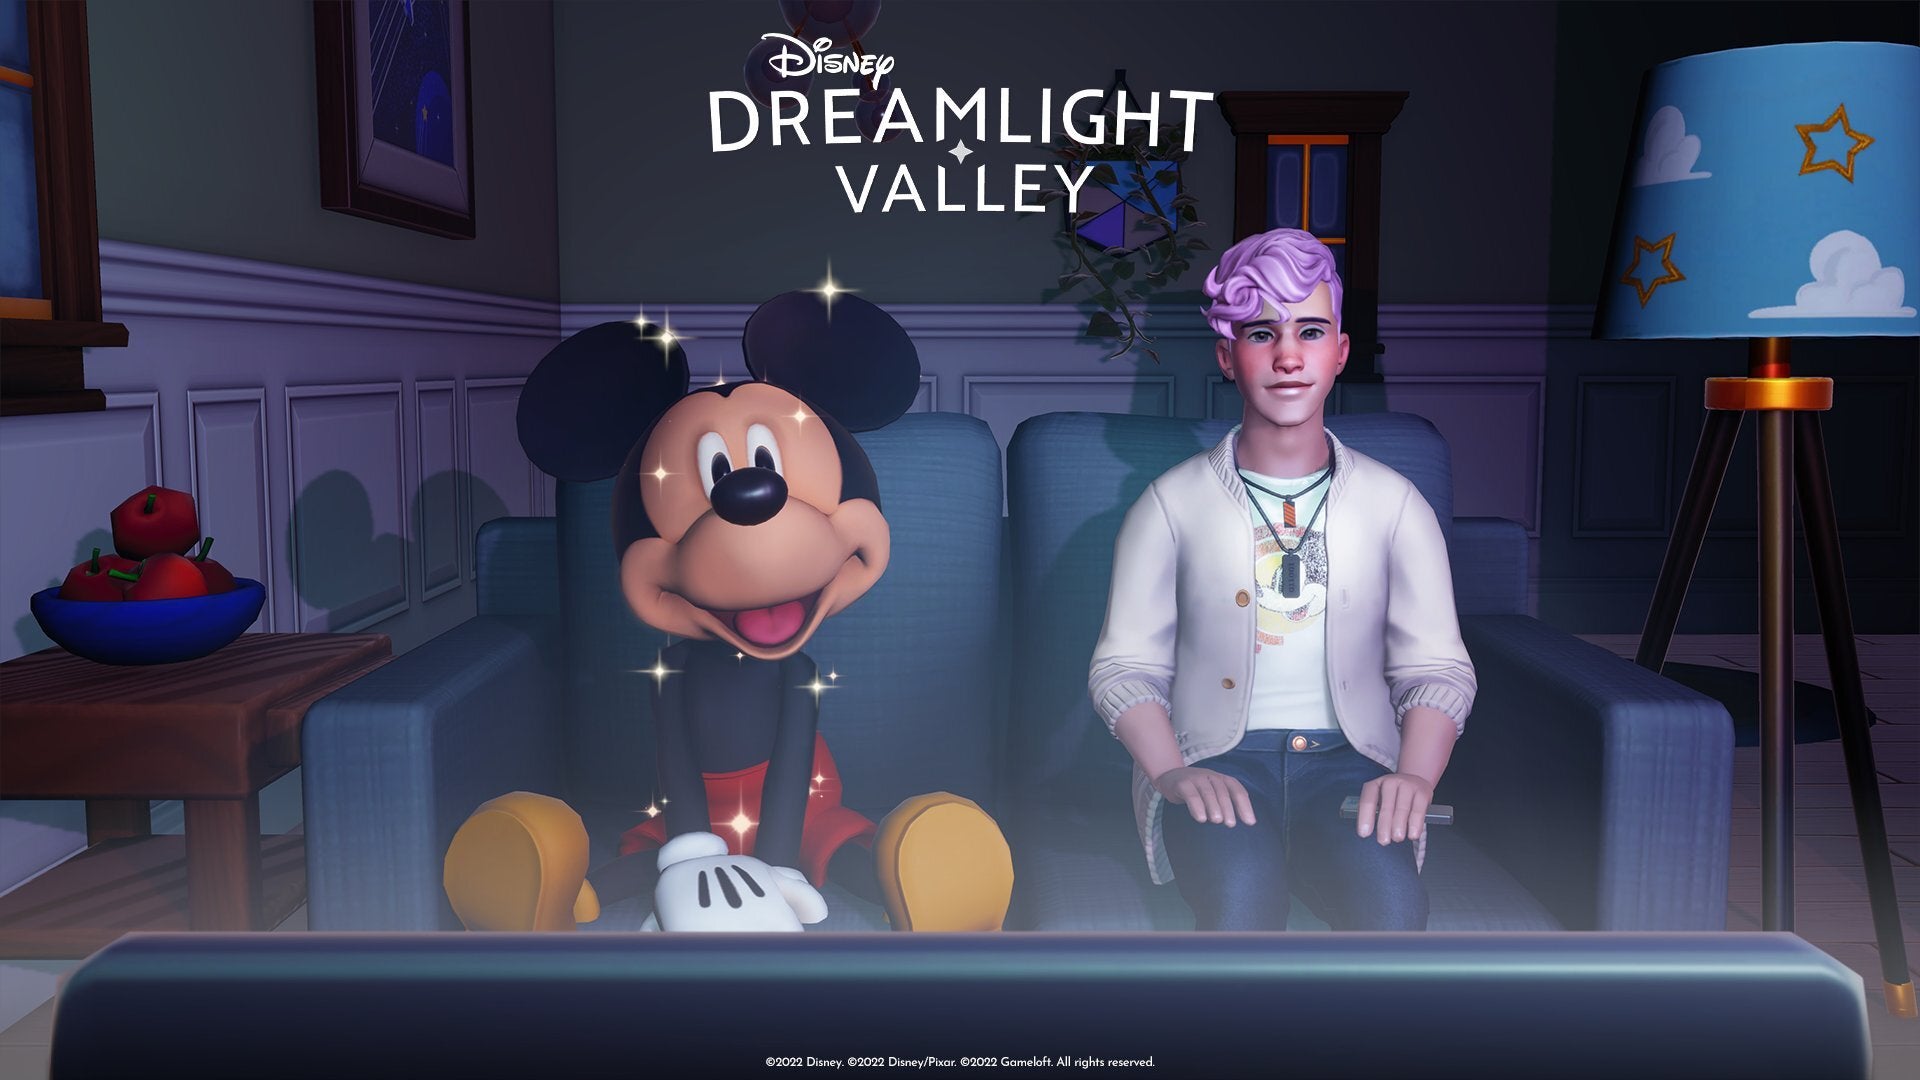 A player watches television with Mickey Mouse in Disney Dreamlight Valley